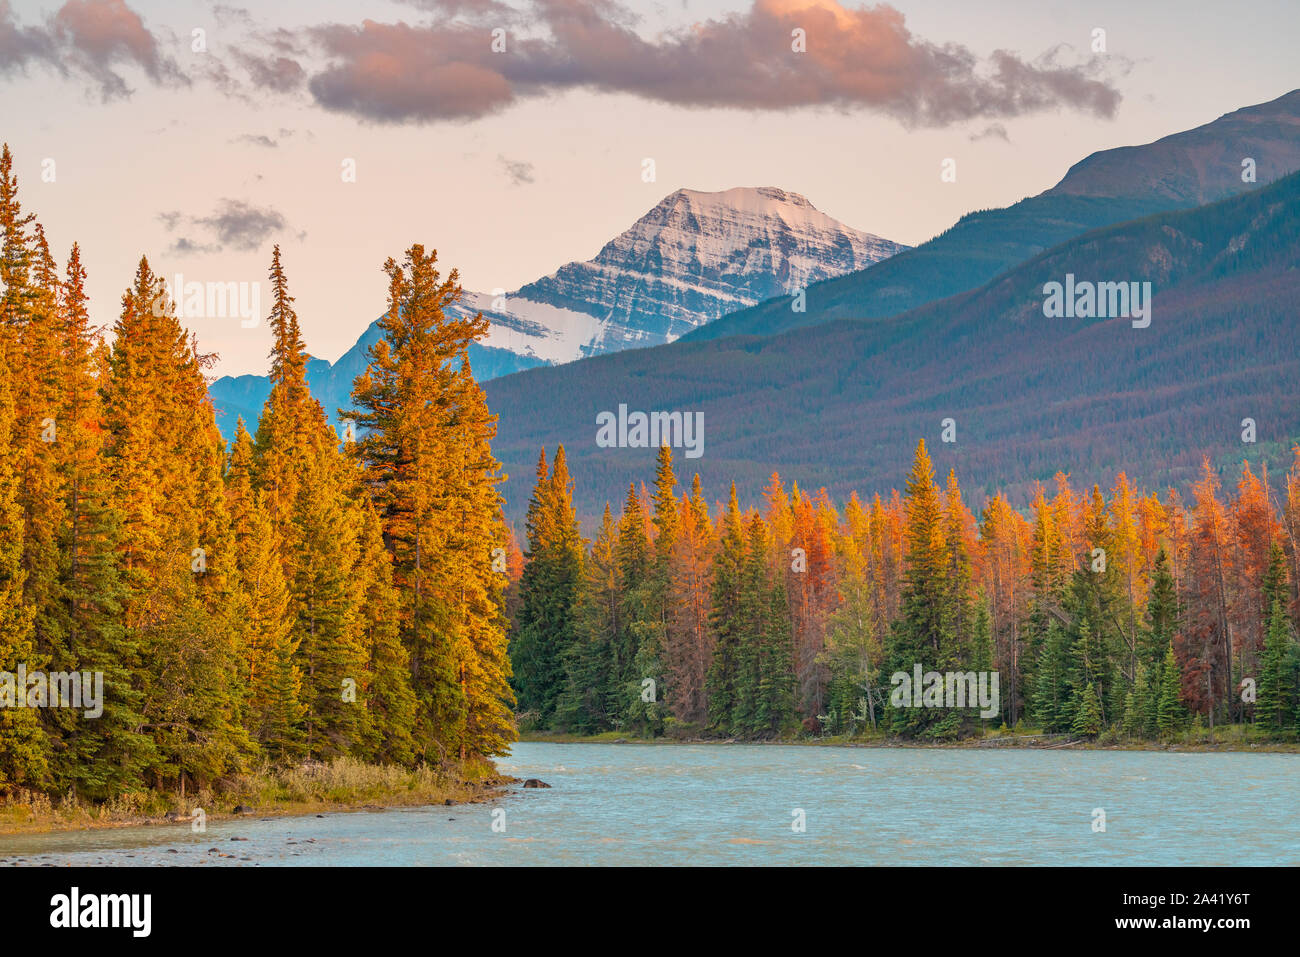 Autumn landscape in the Canadian Rockies Stock Photo